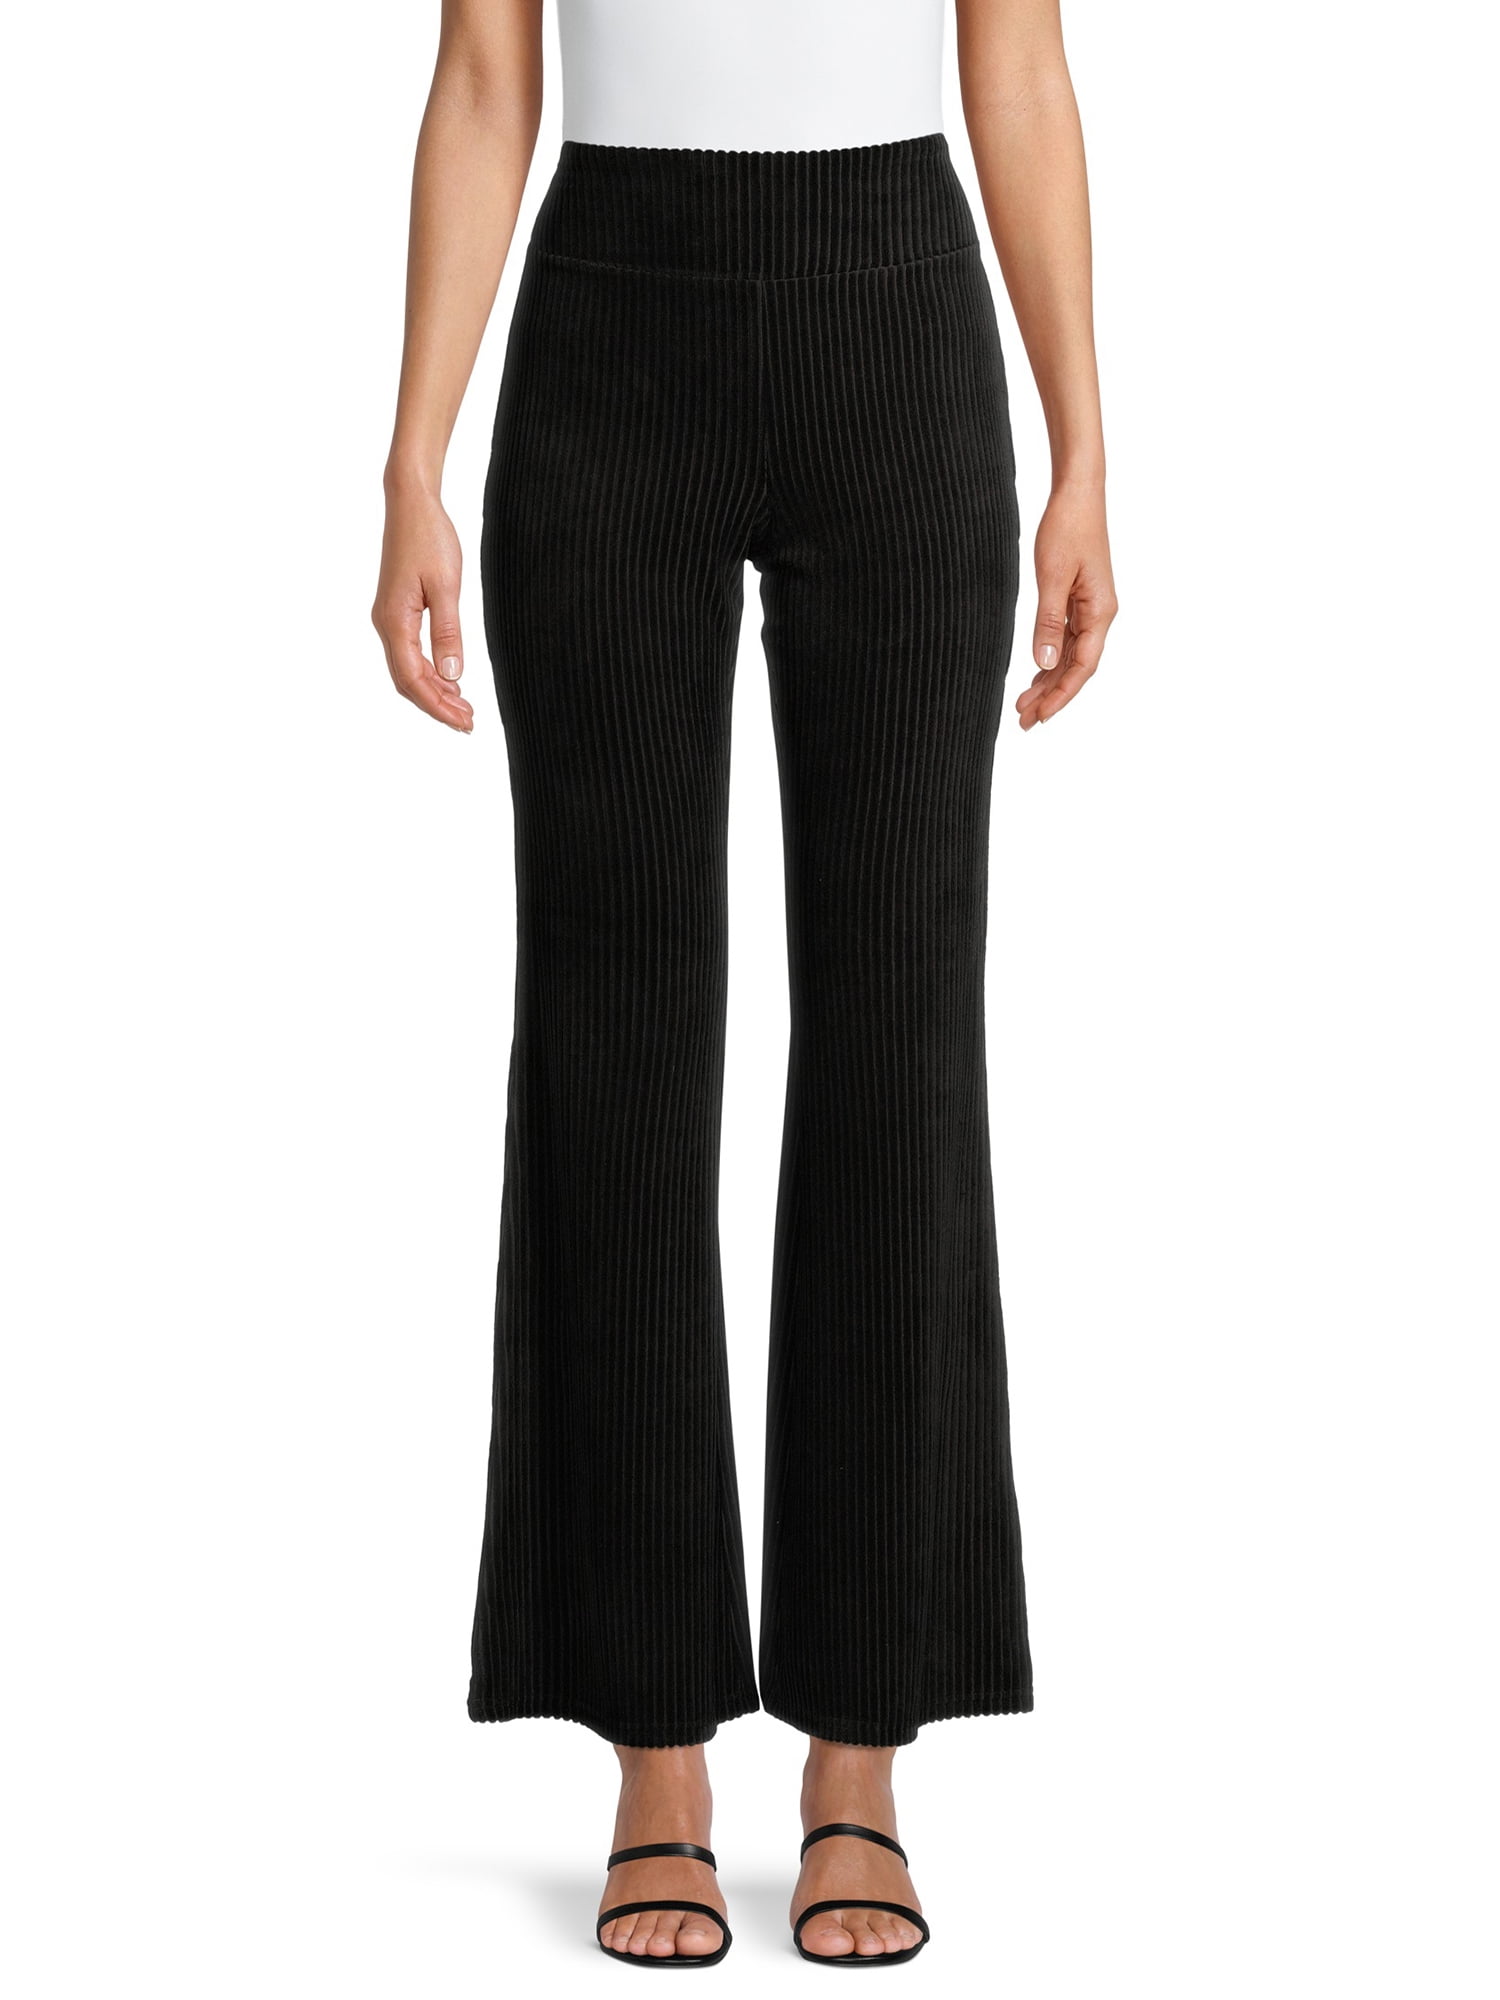 No Boundaries Juniors' High Rise Pull-On Stretch Cord Flare Pants